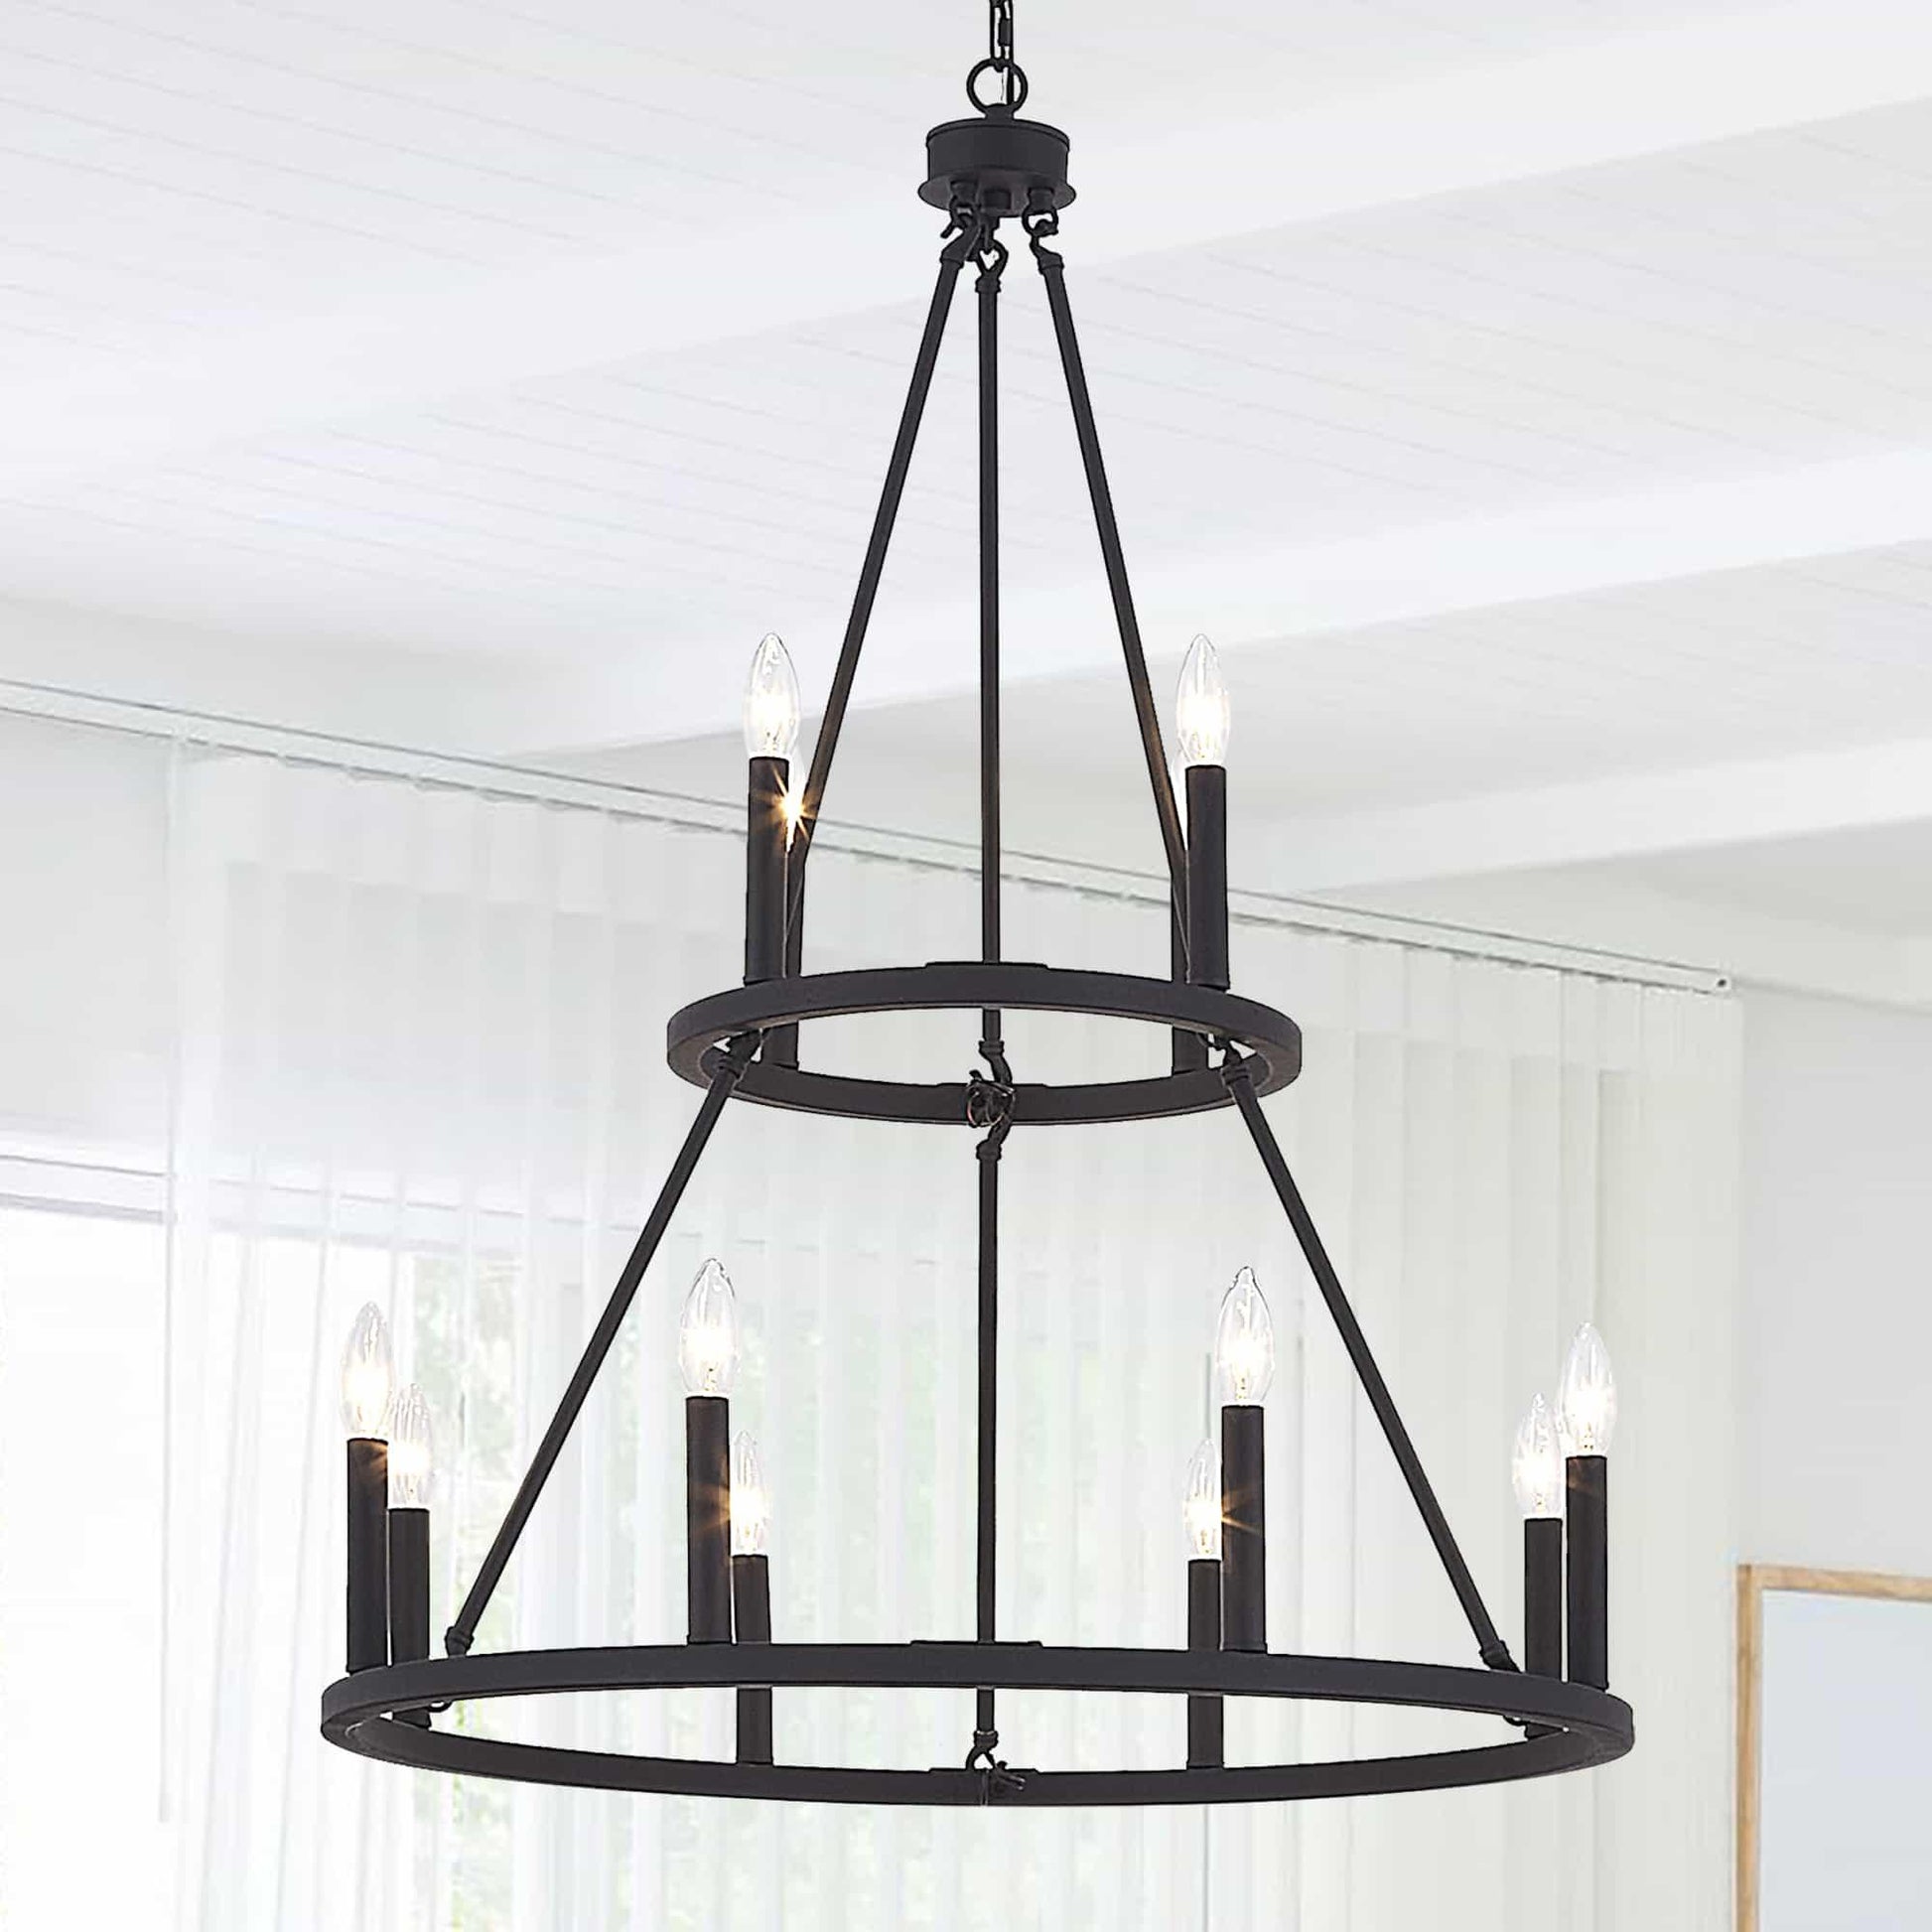 12 light candle style wagon wheel tiered chandelier (2) by ACROMA